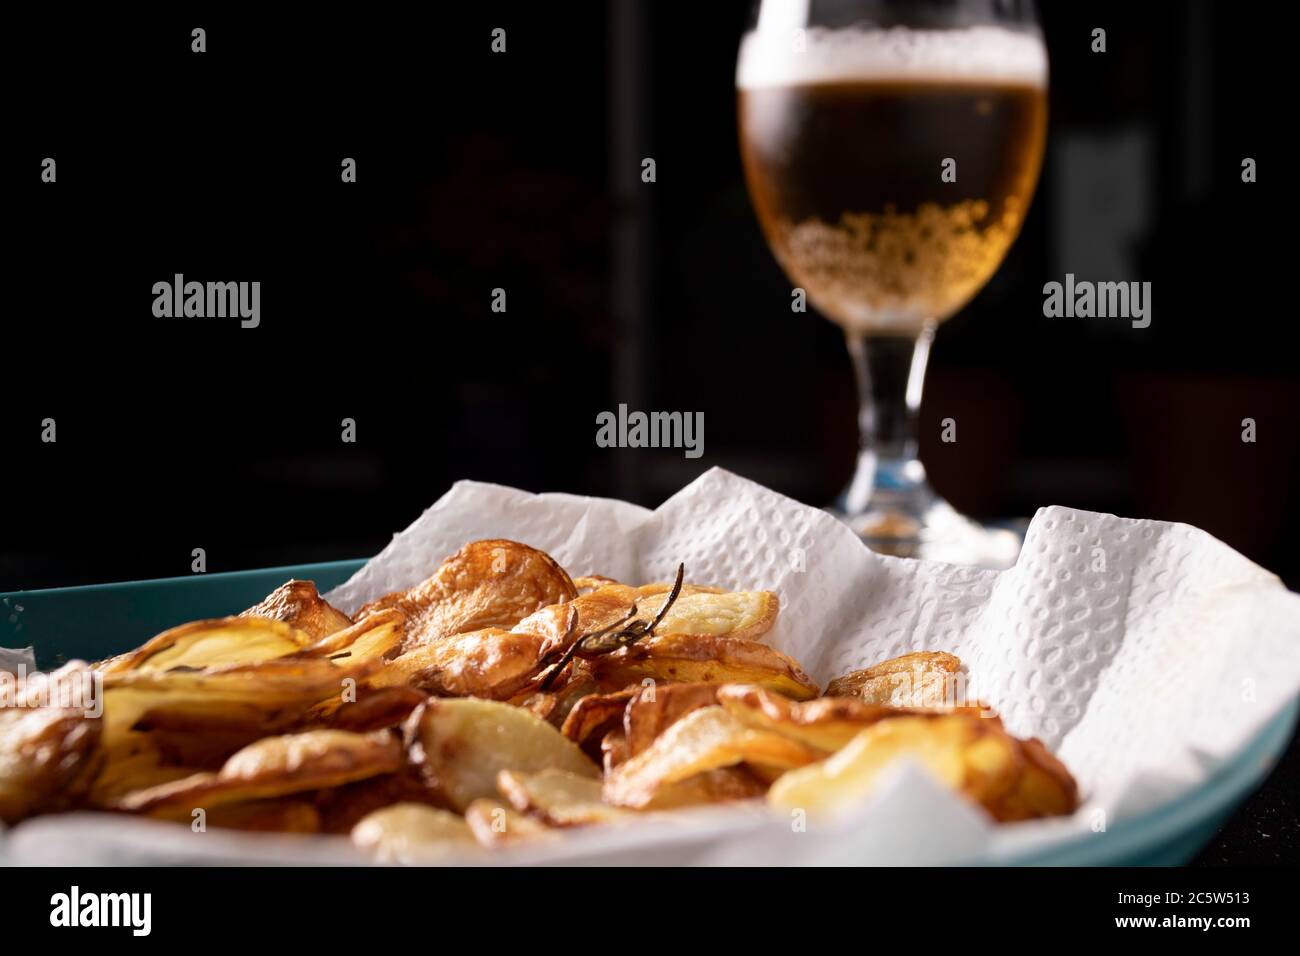 french fries with beer Stock Photo